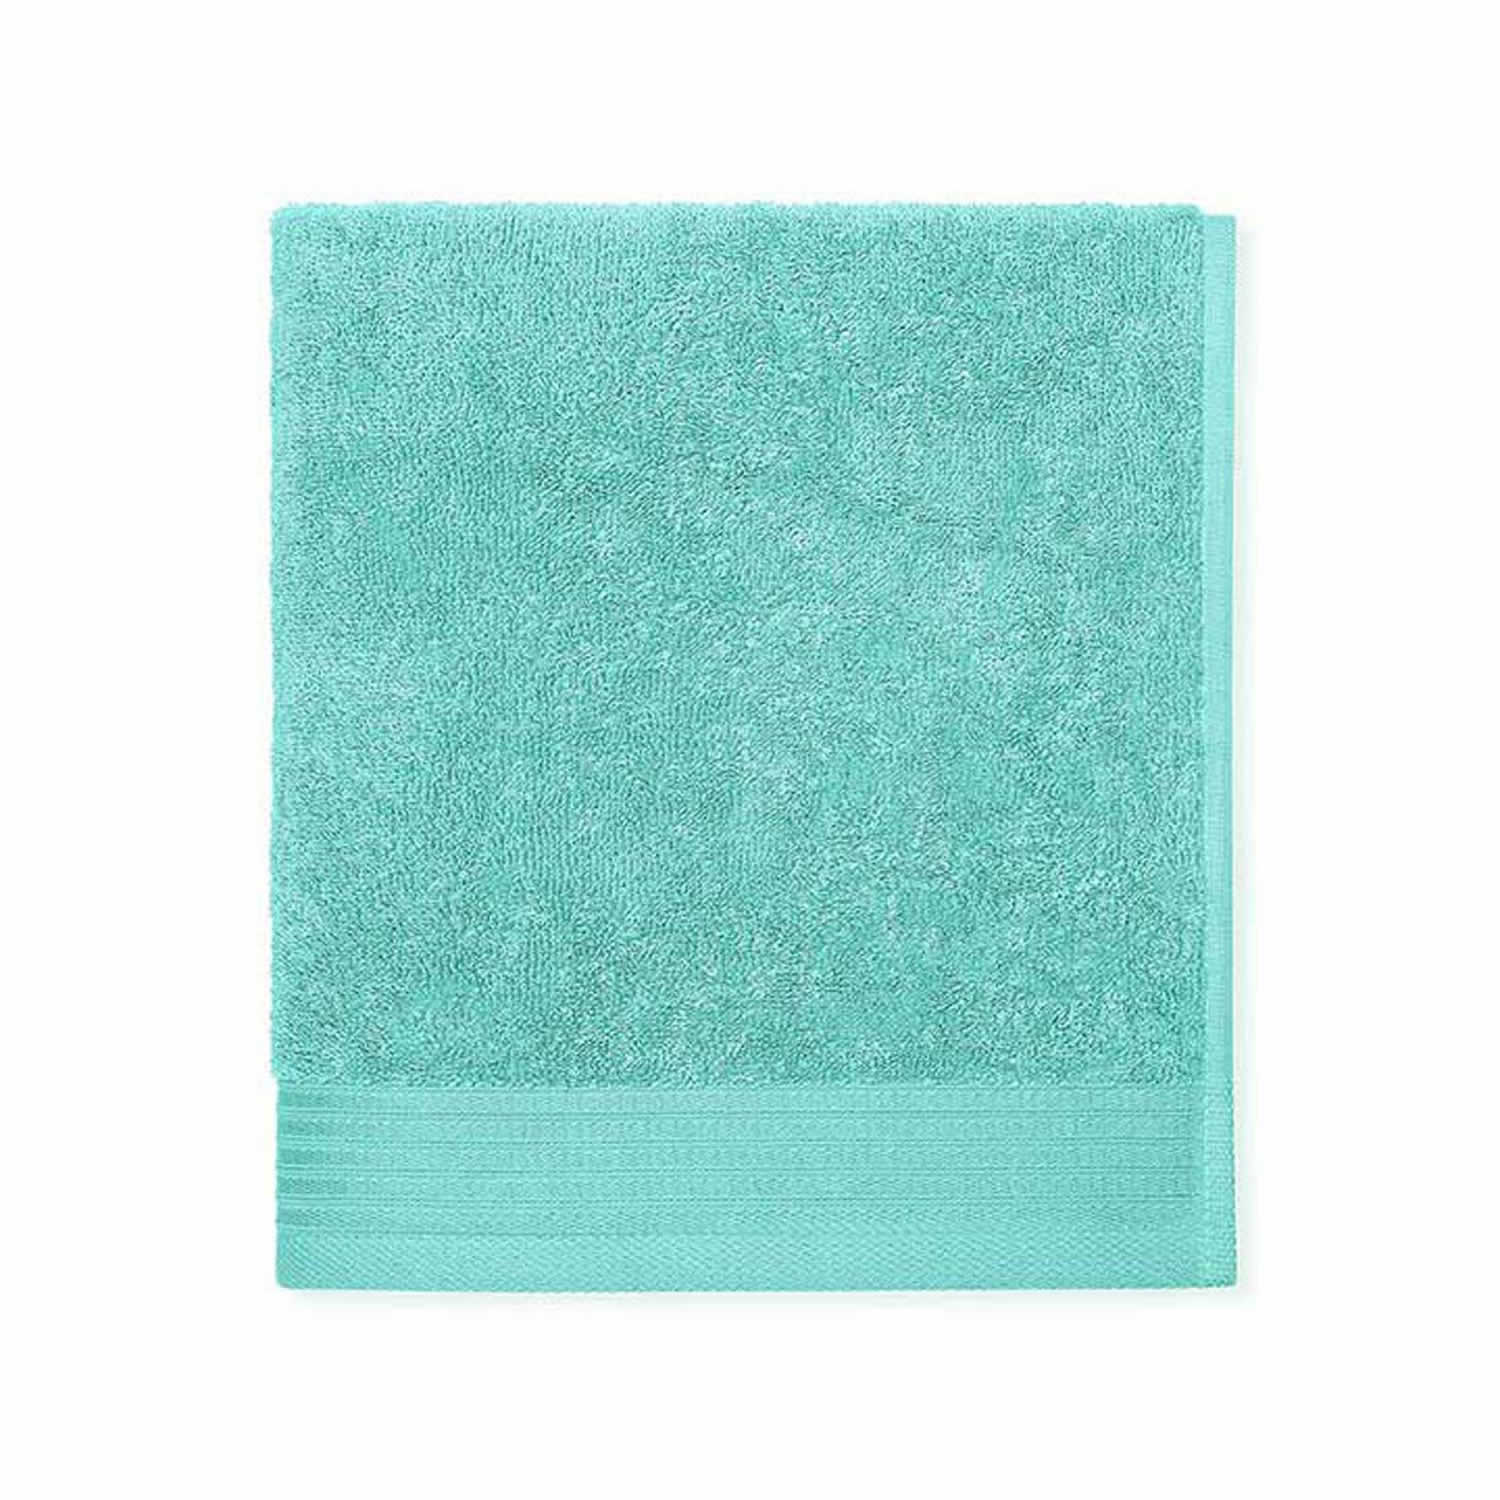 Schlossberg COSHMERE towel - Turquoise